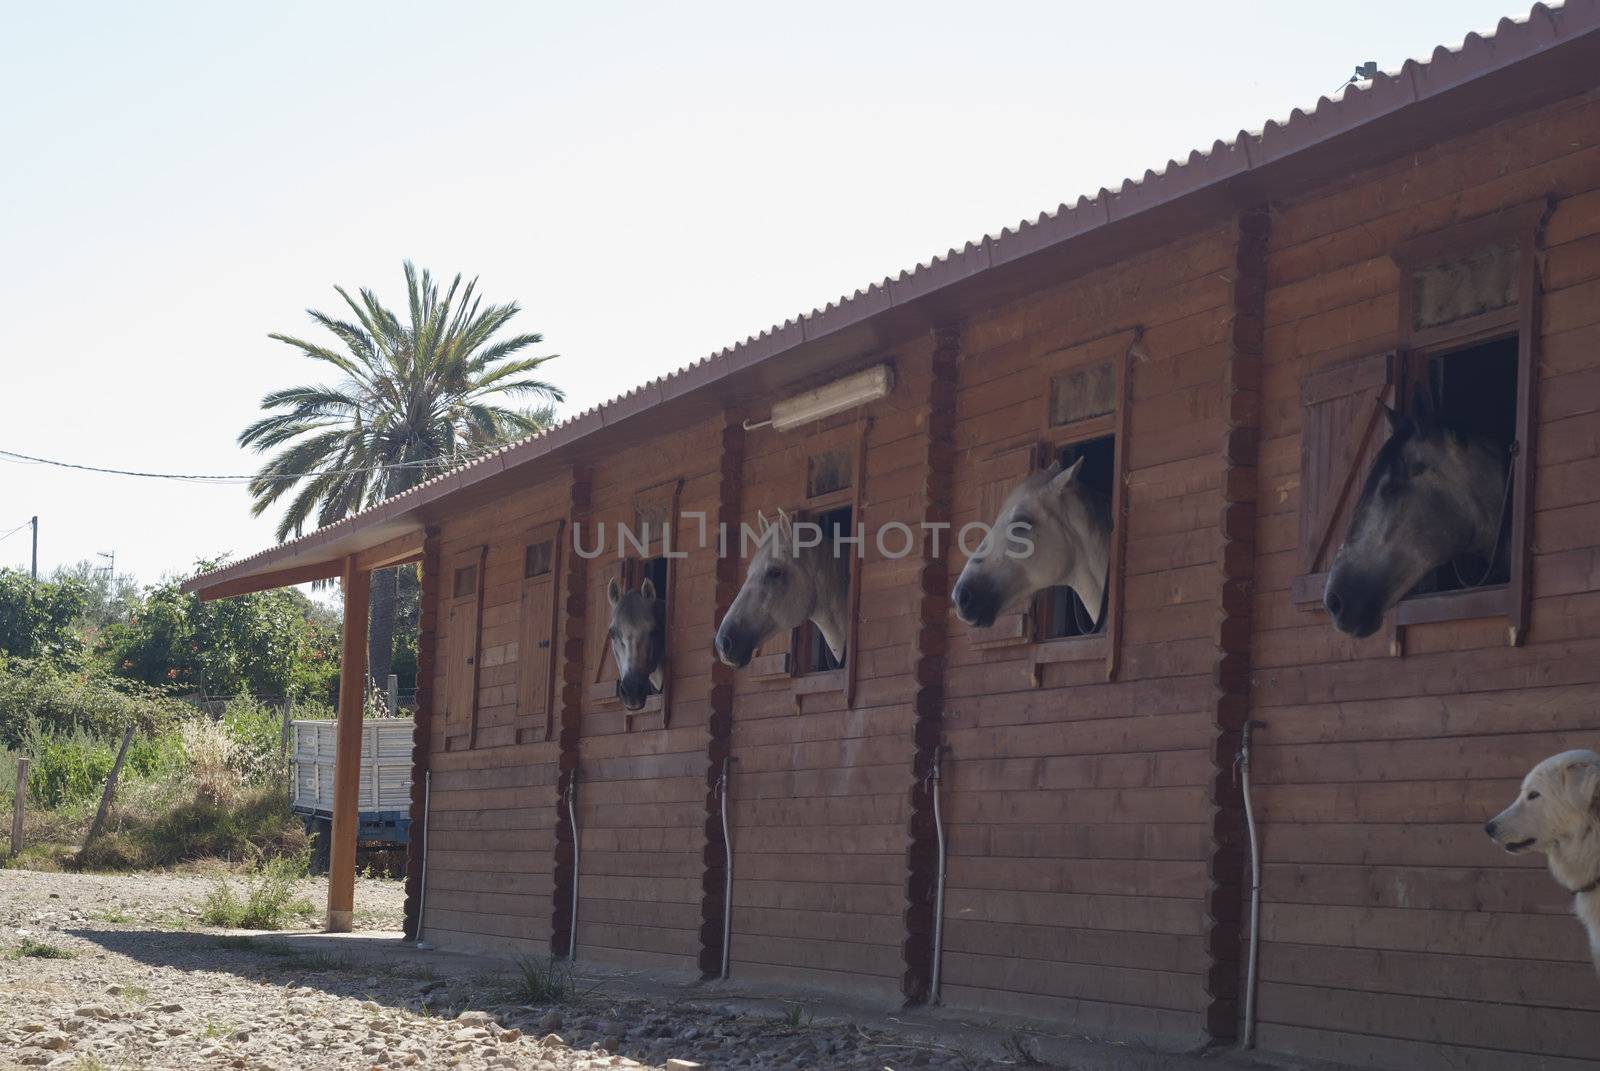 Horses in their stable. Nebrodi park, Sicily, Italy